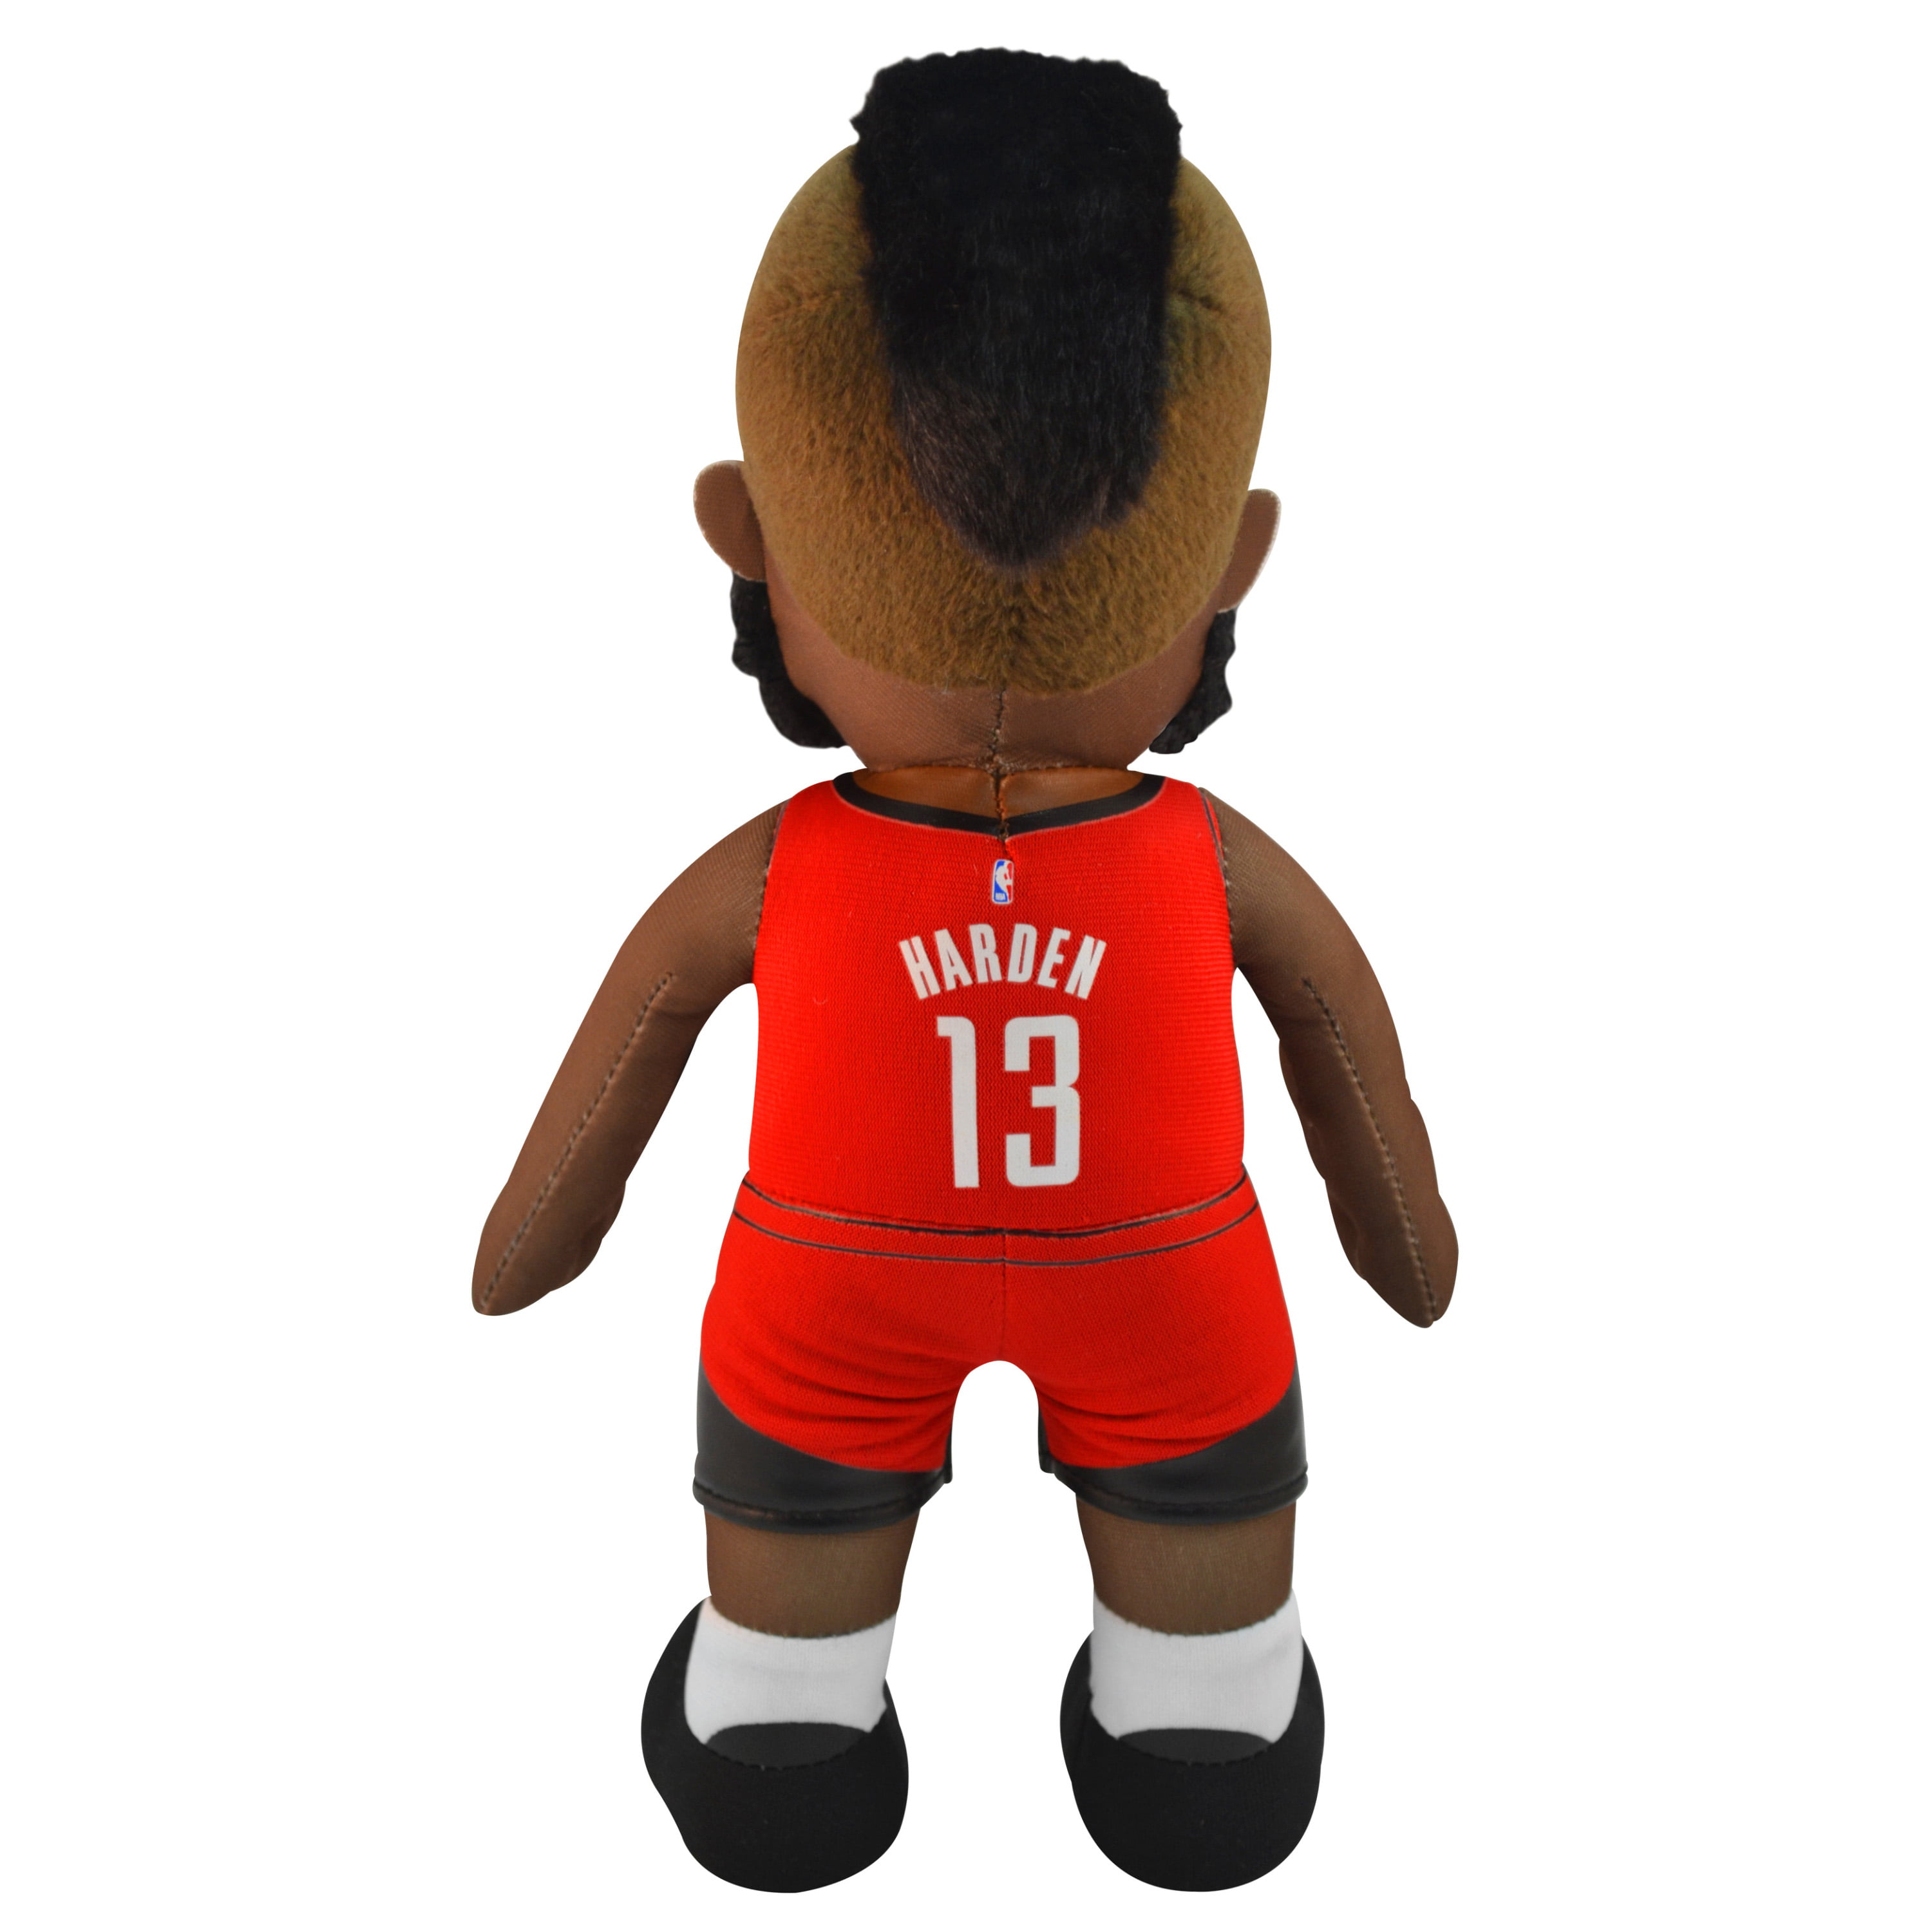 A Mascot for Play or Display Bleacher Creatures Houston Rockets Clutch 10 Plush Figure